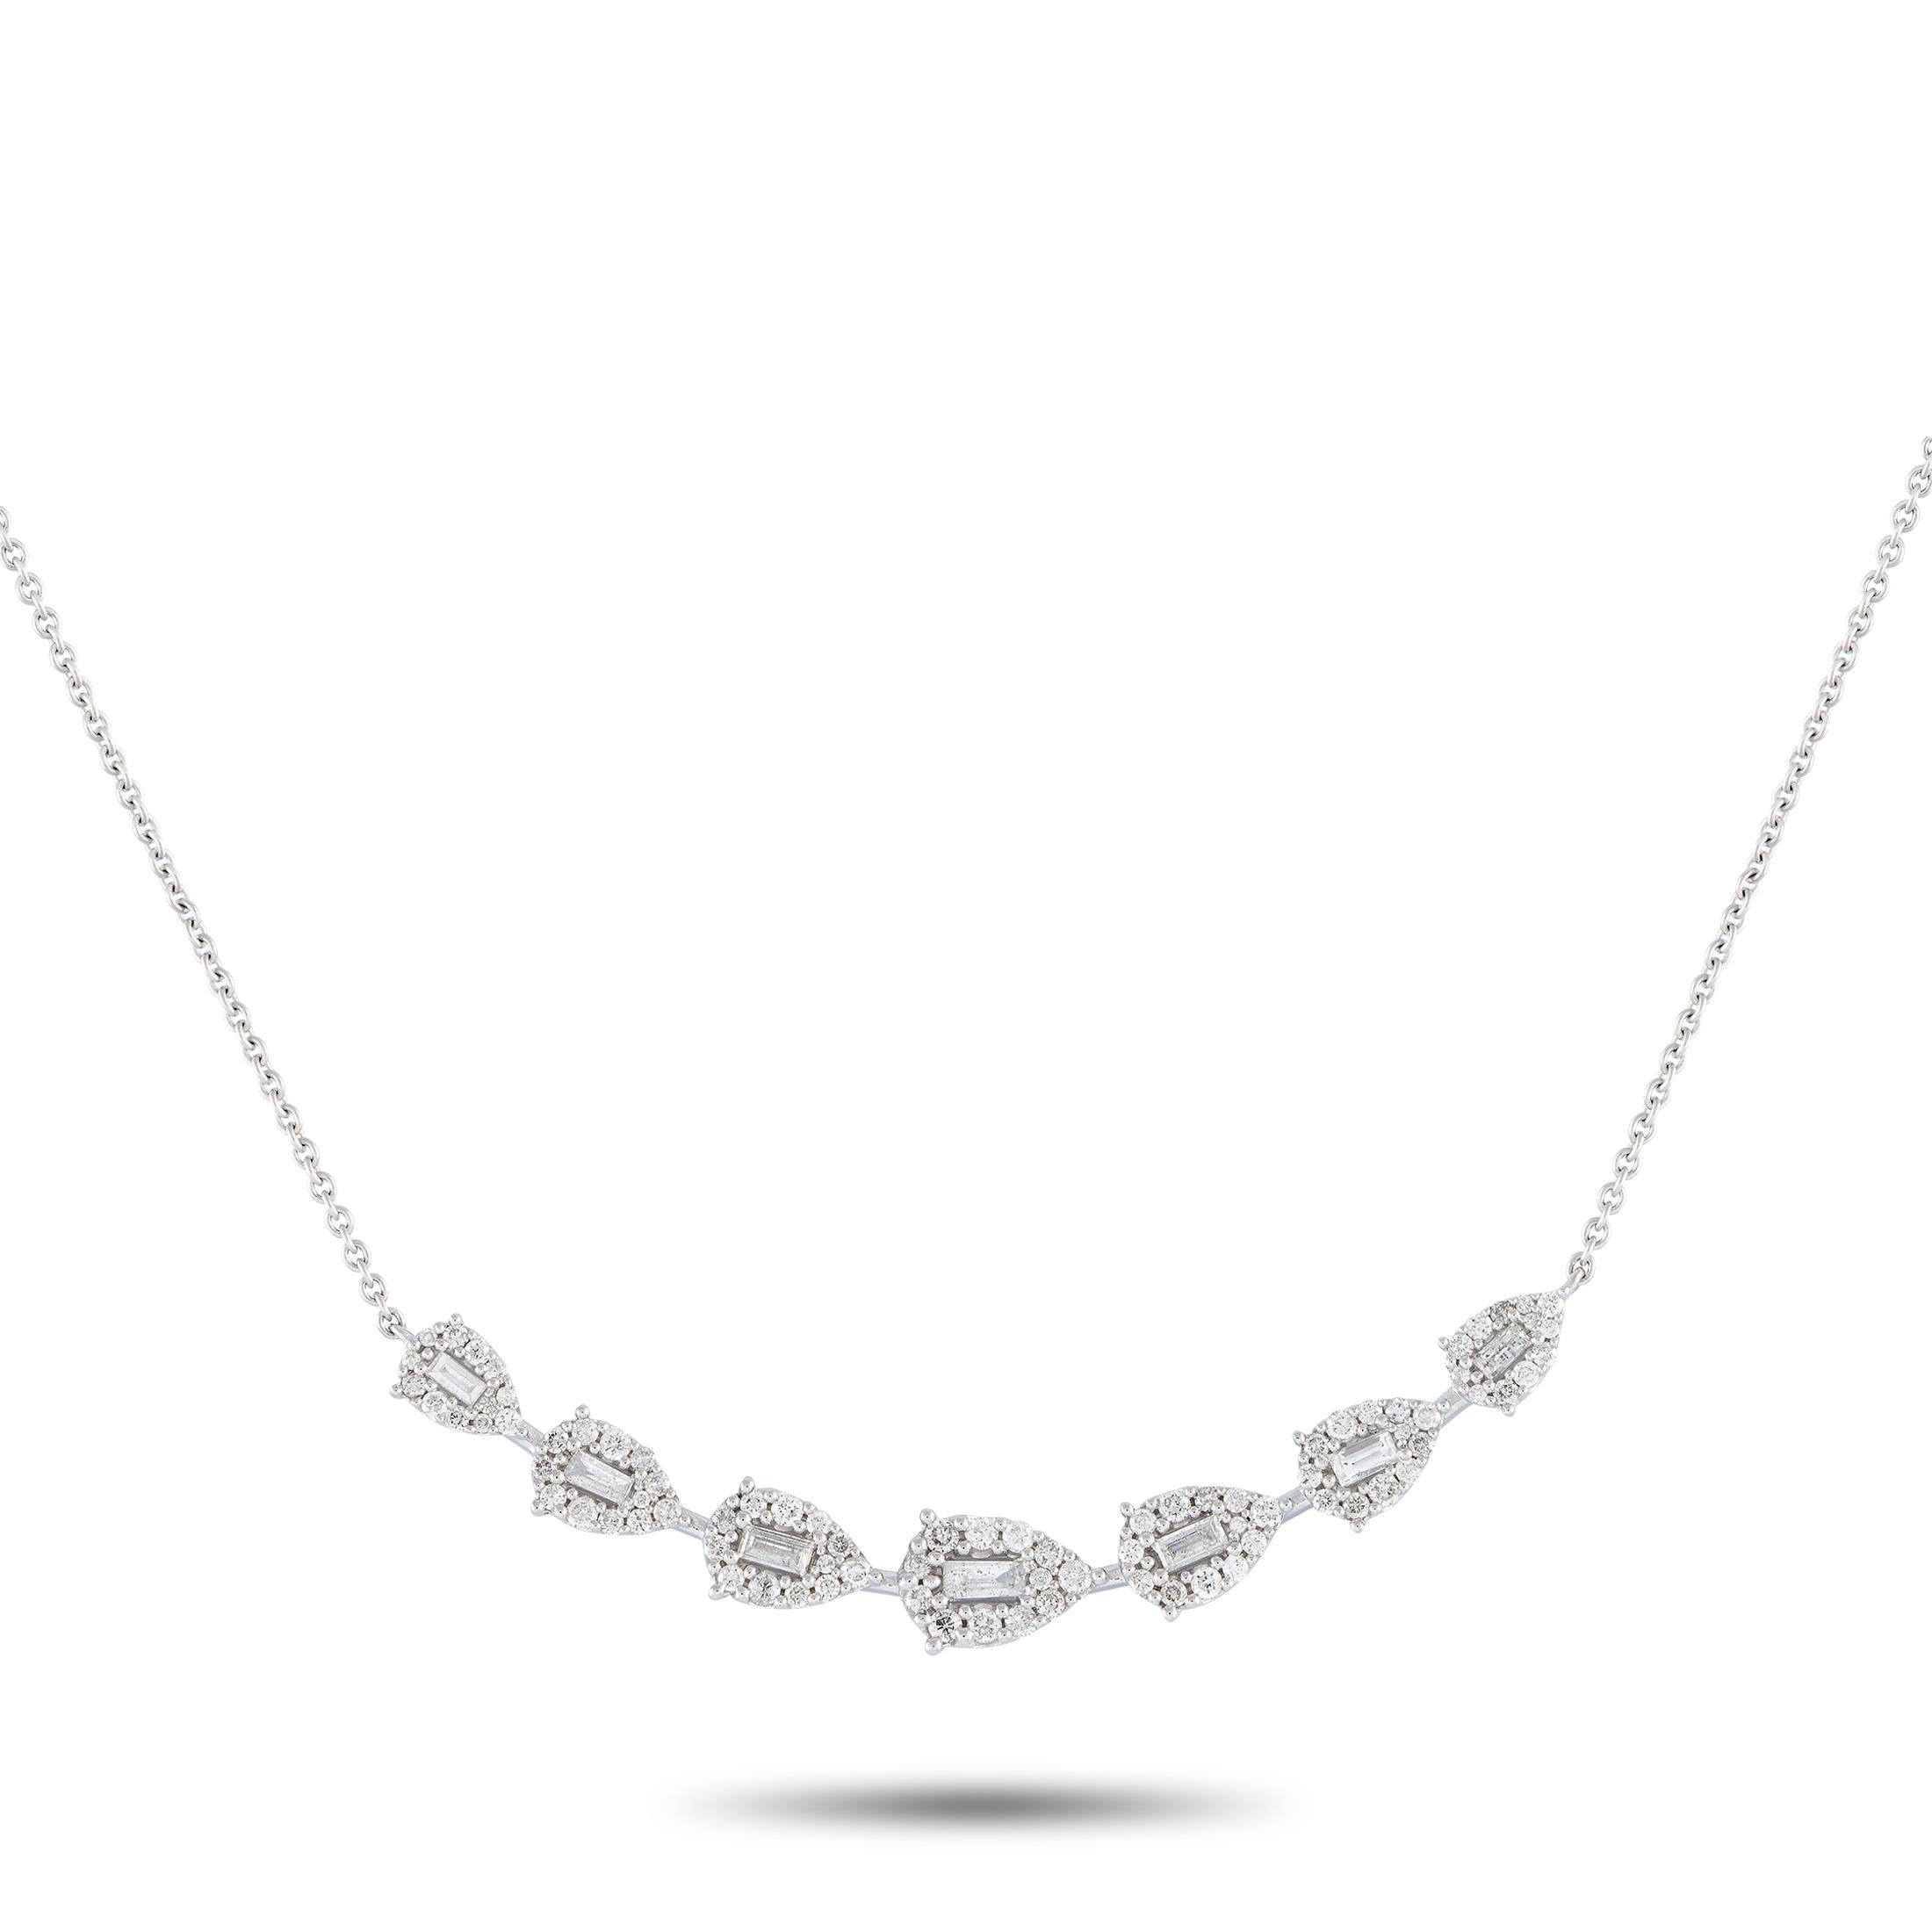 14K White Gold 1.0ct Diamond Necklace In New Condition For Sale In Southampton, PA